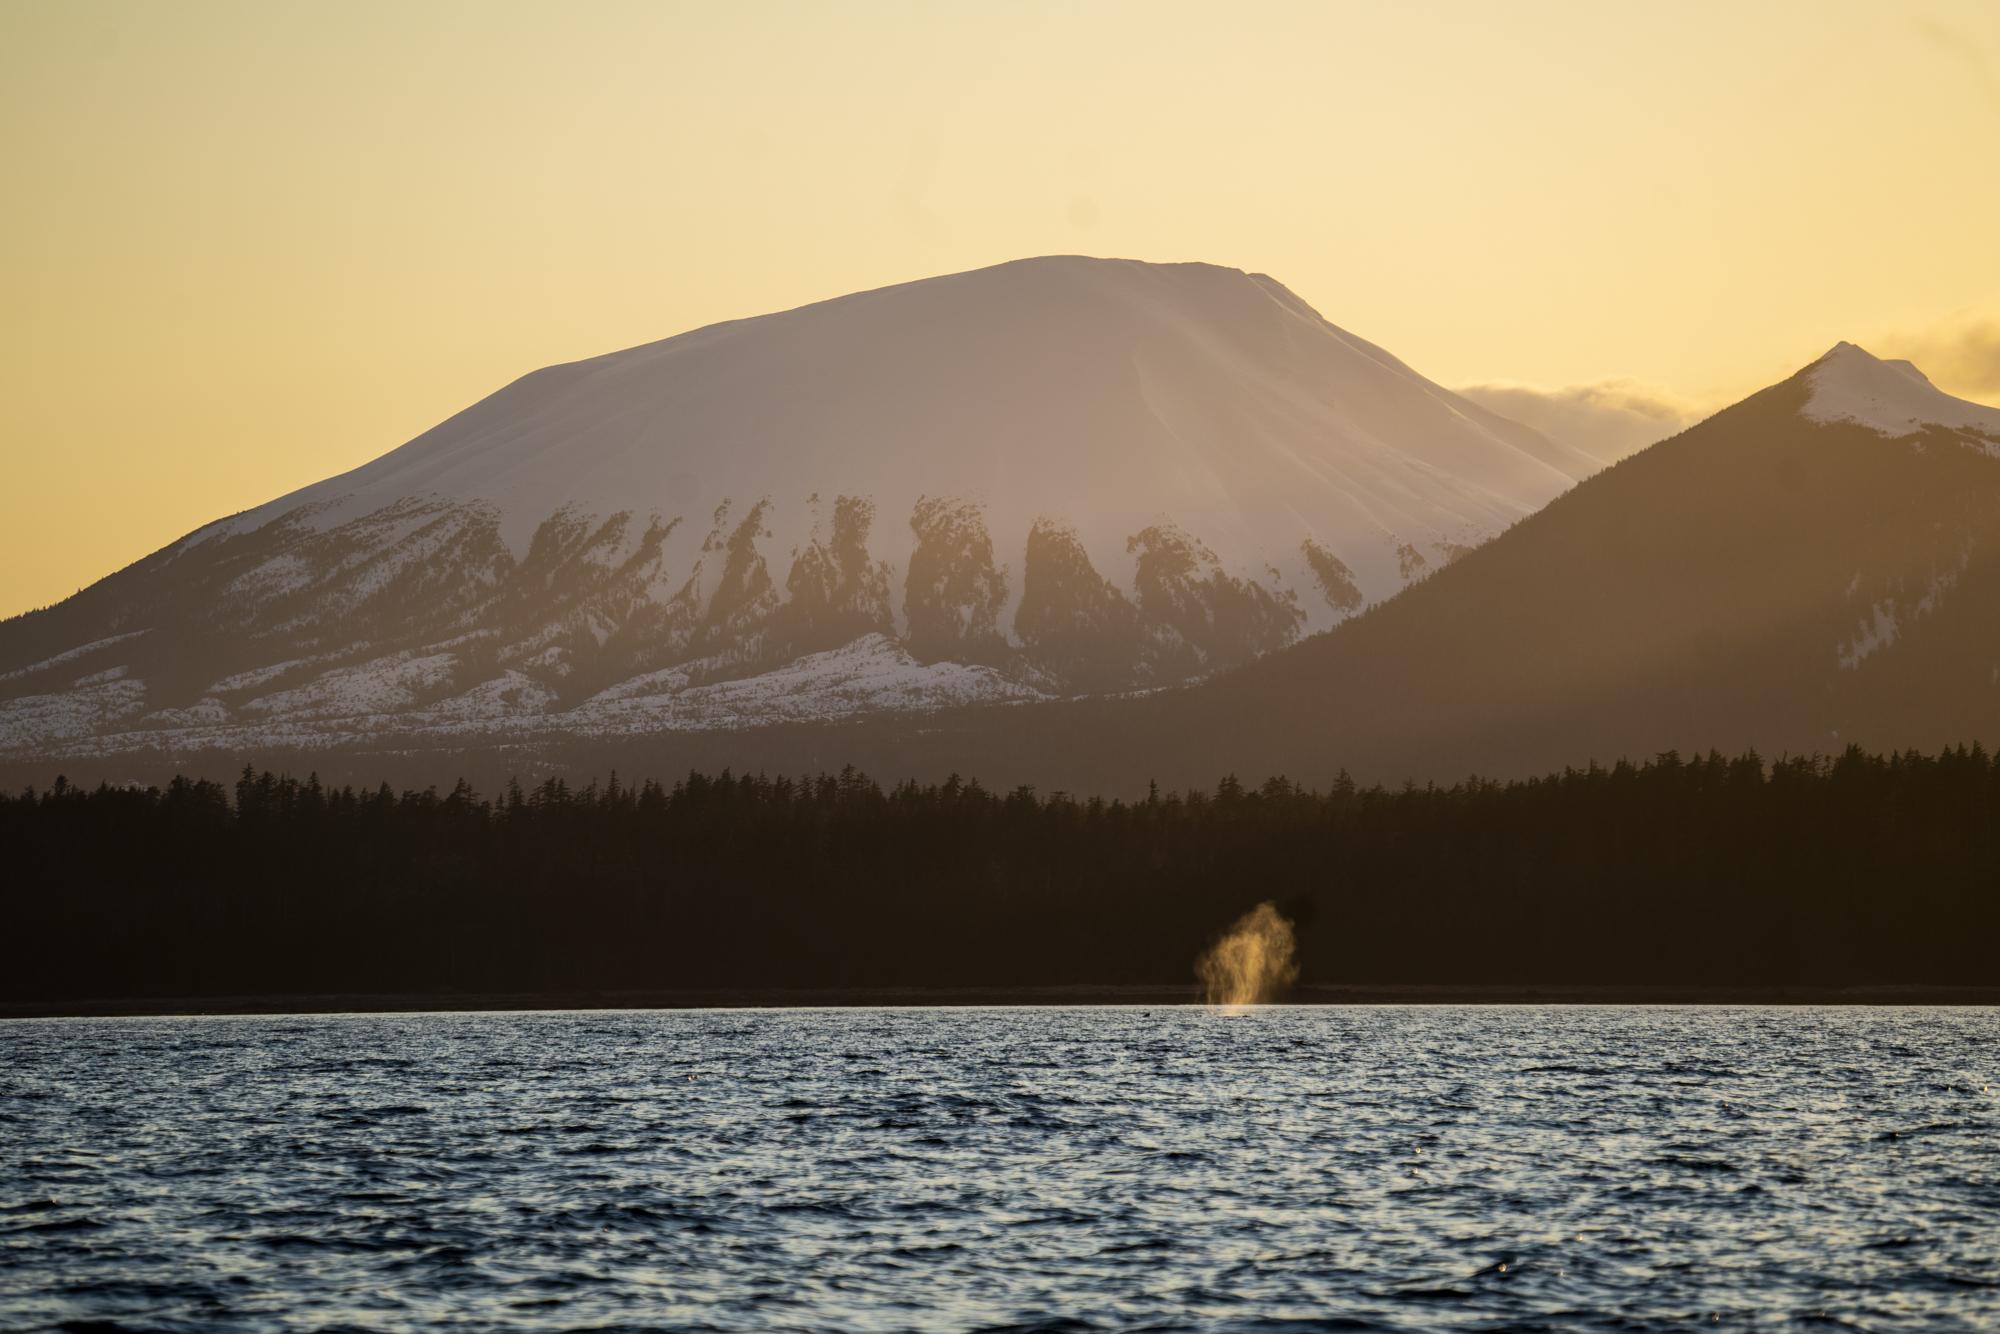 Within the Tongass